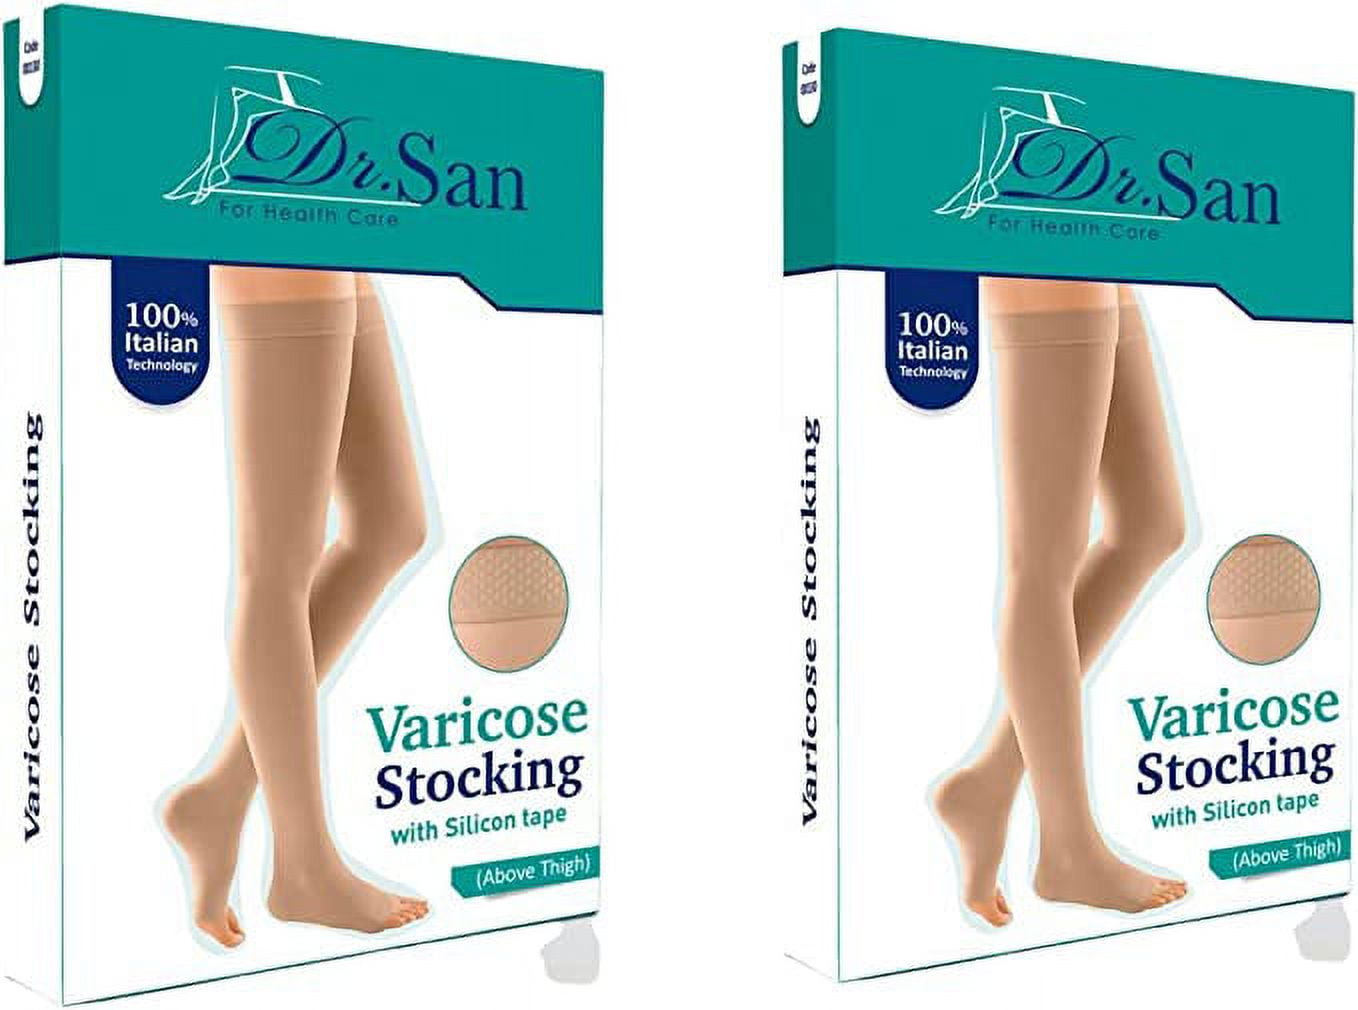 Opaque Knee-Hi Open Toe Support Stockings 20-30mmHg, Relieves Discomfort  from Post-Thrombotic Syndrome, Lymphatic and Venous Issues - 1 Pair